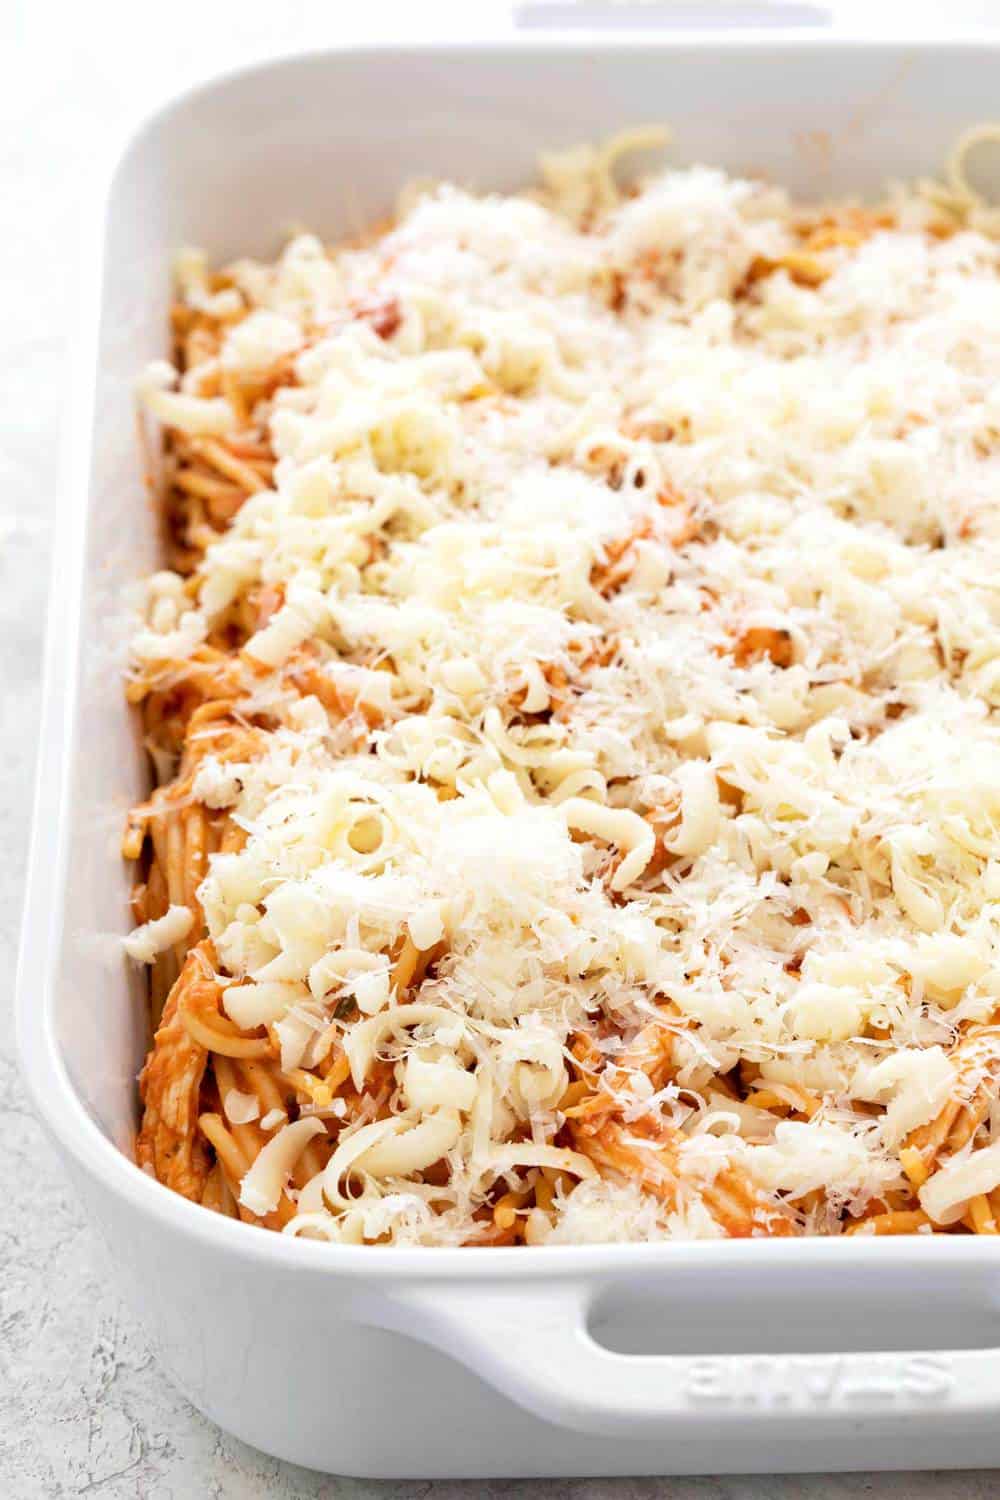 Lots of shredded cheese in a casserole dish with pasta